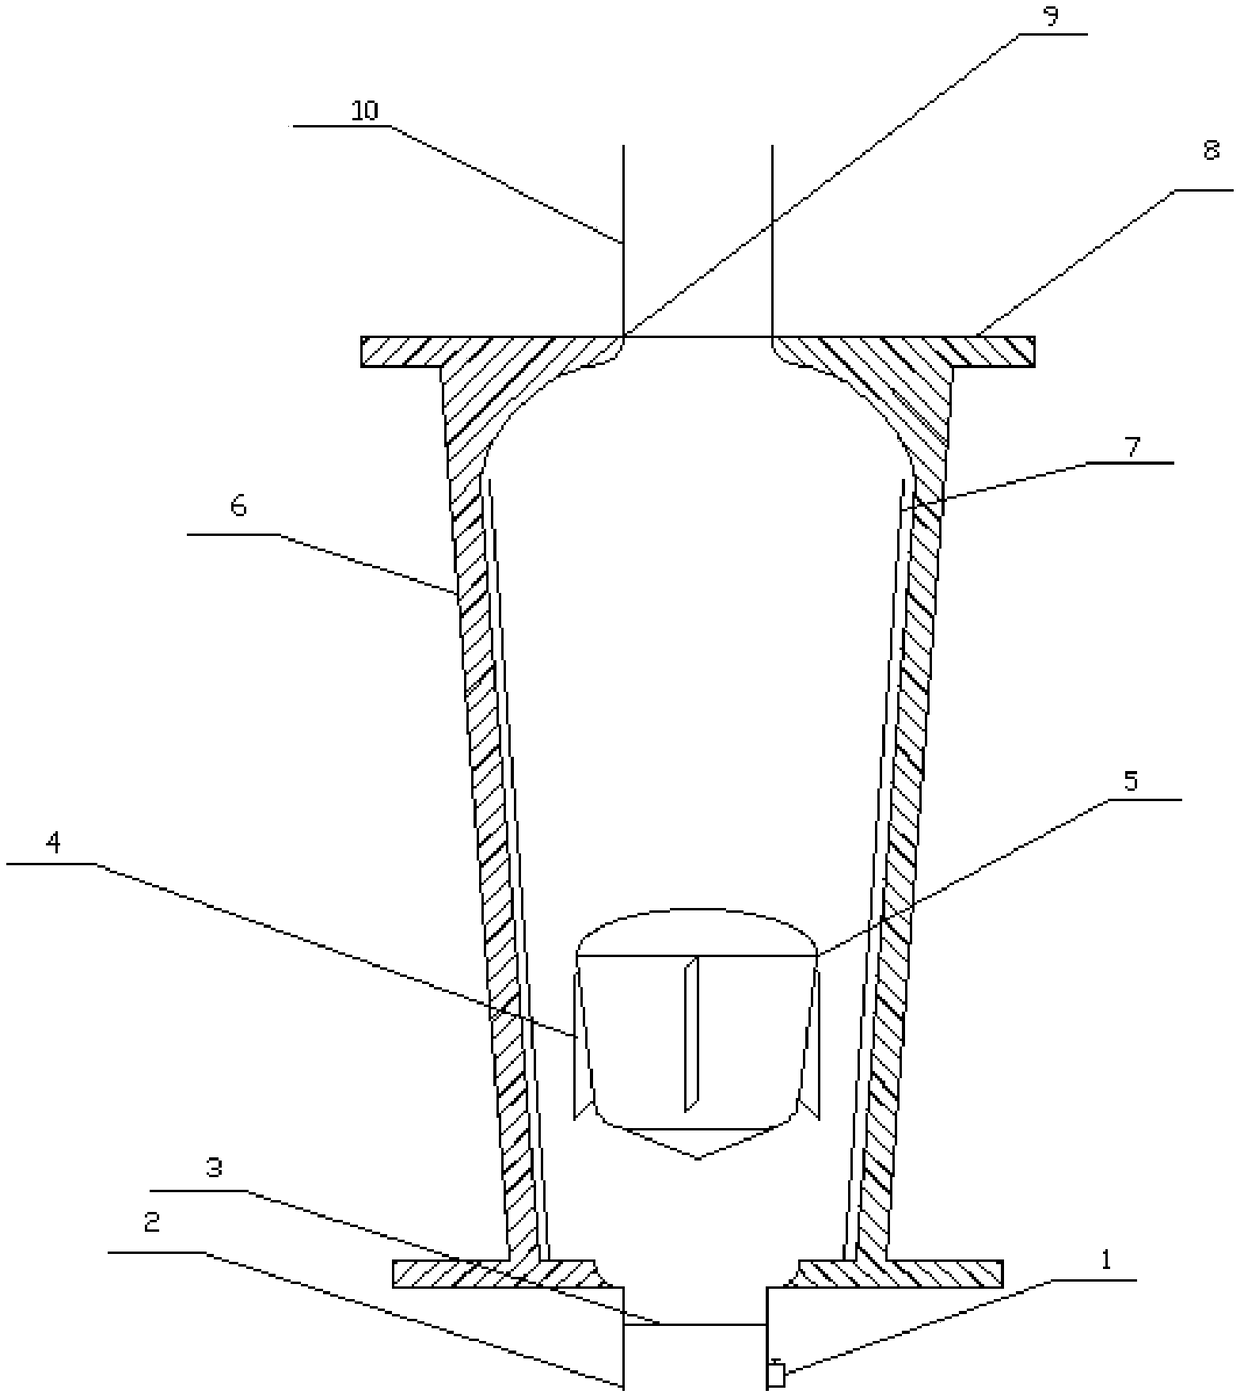 Novel fluid damping device capable of coping with pressure jump